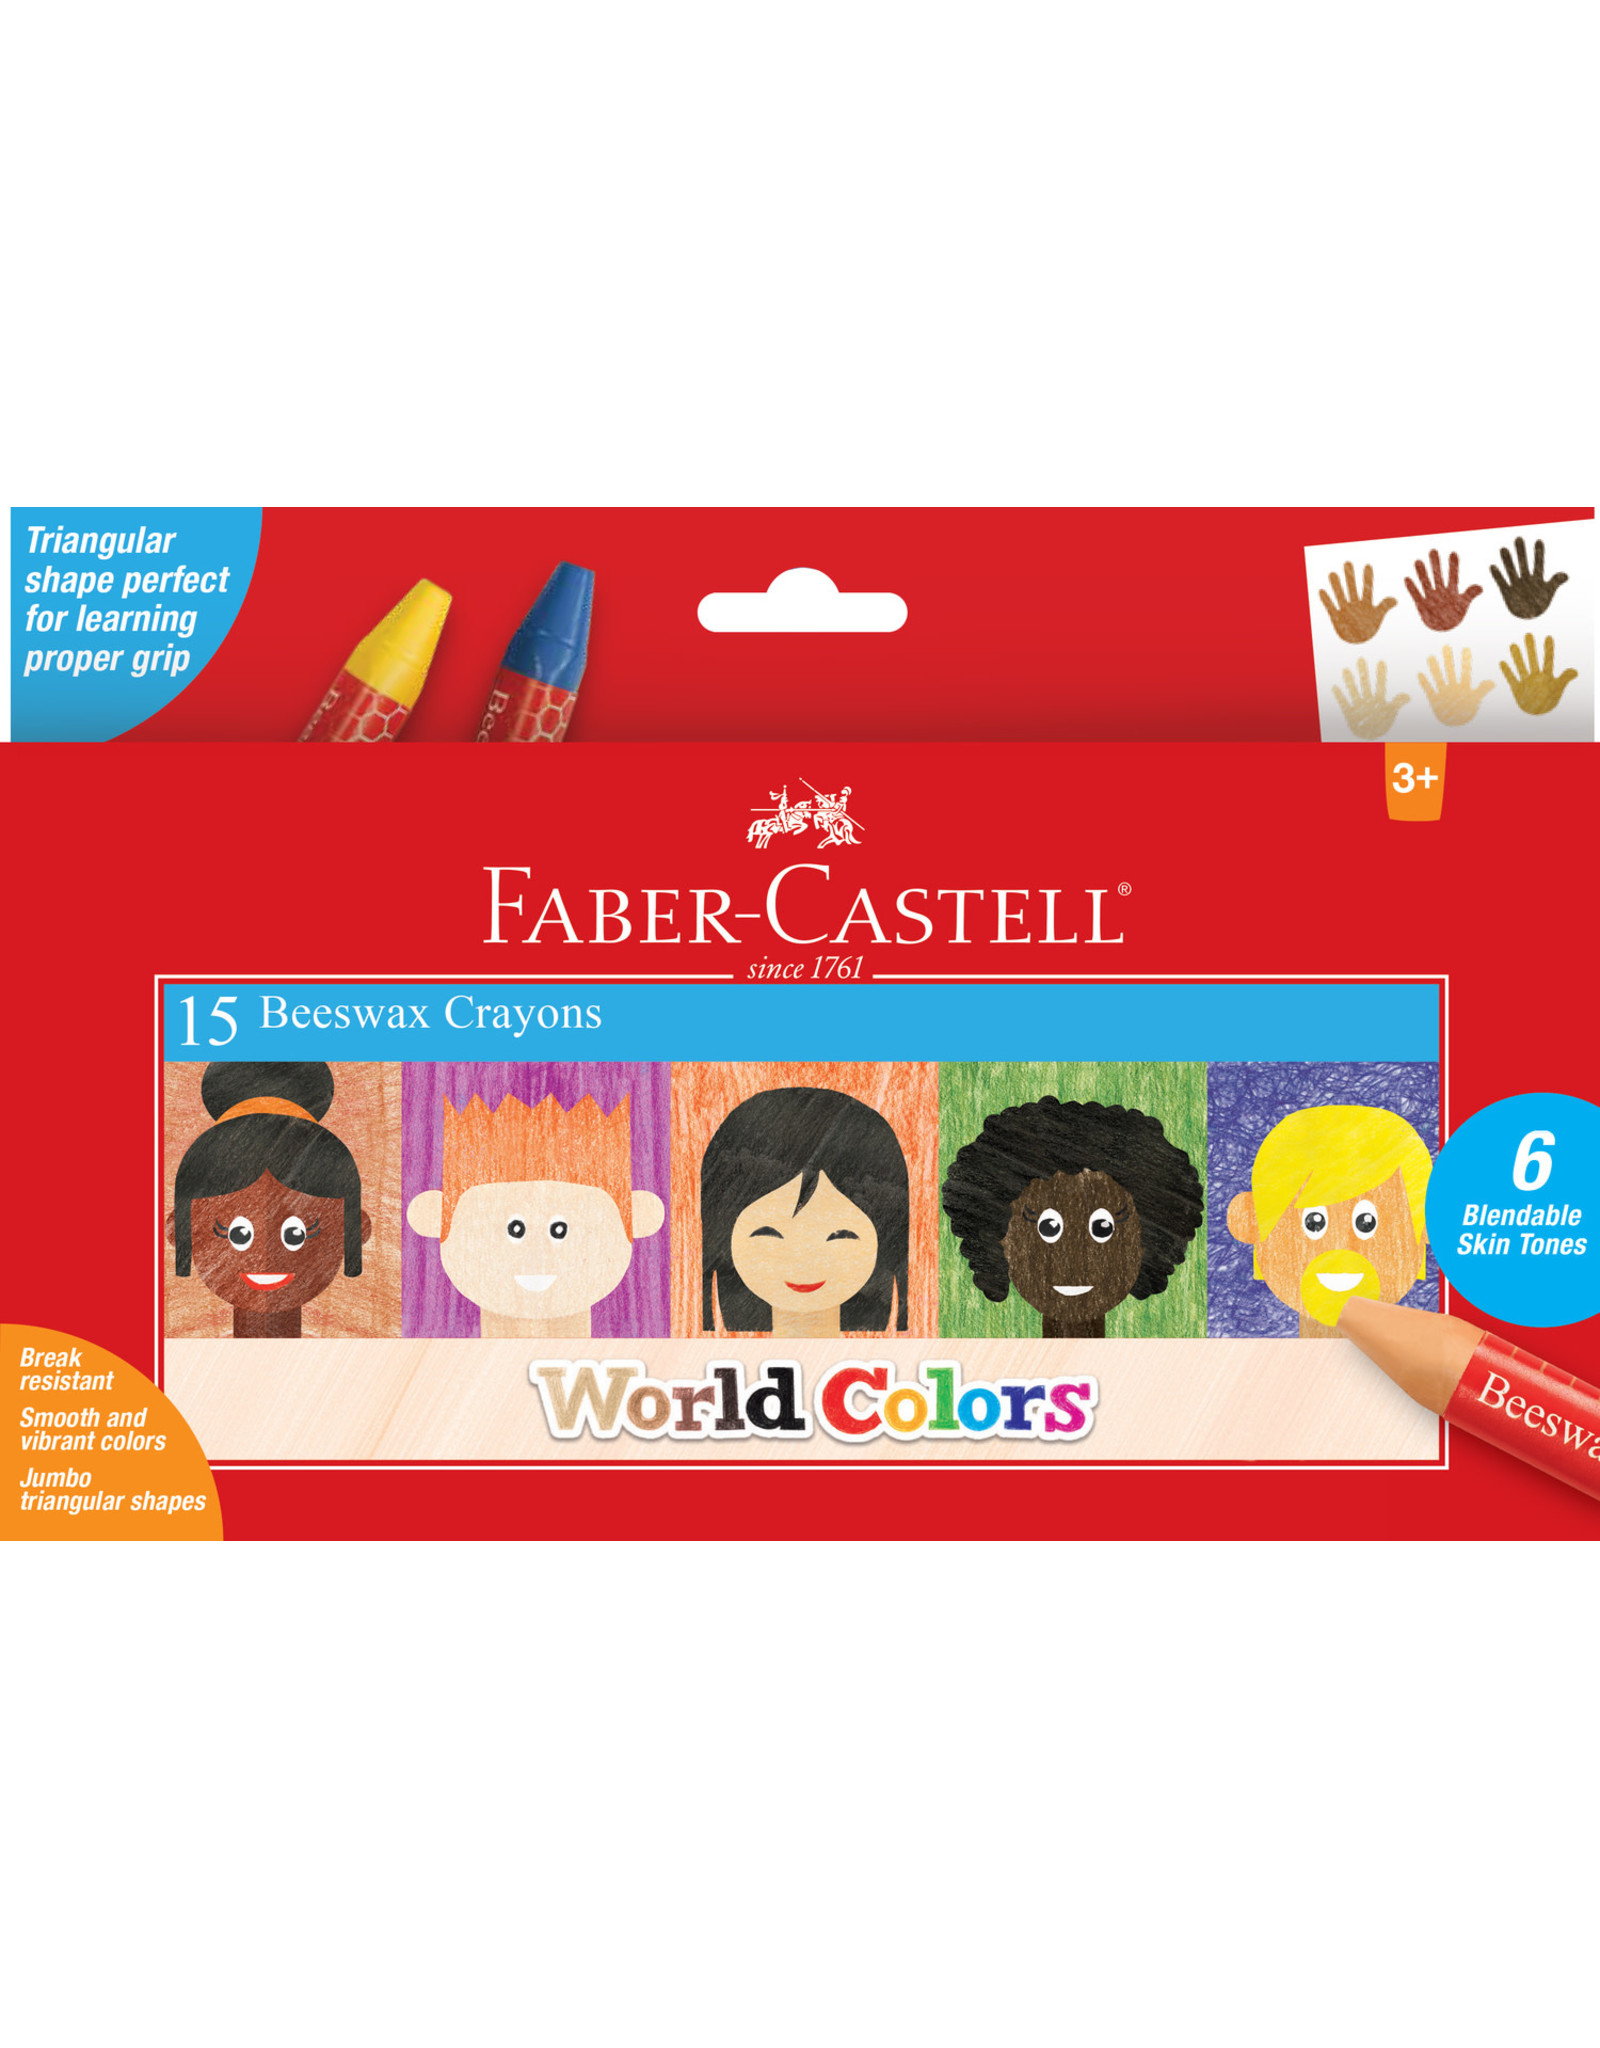 FABER-CASTELL Faber-Castell Beeswax Crayons, World Colors Set of 15